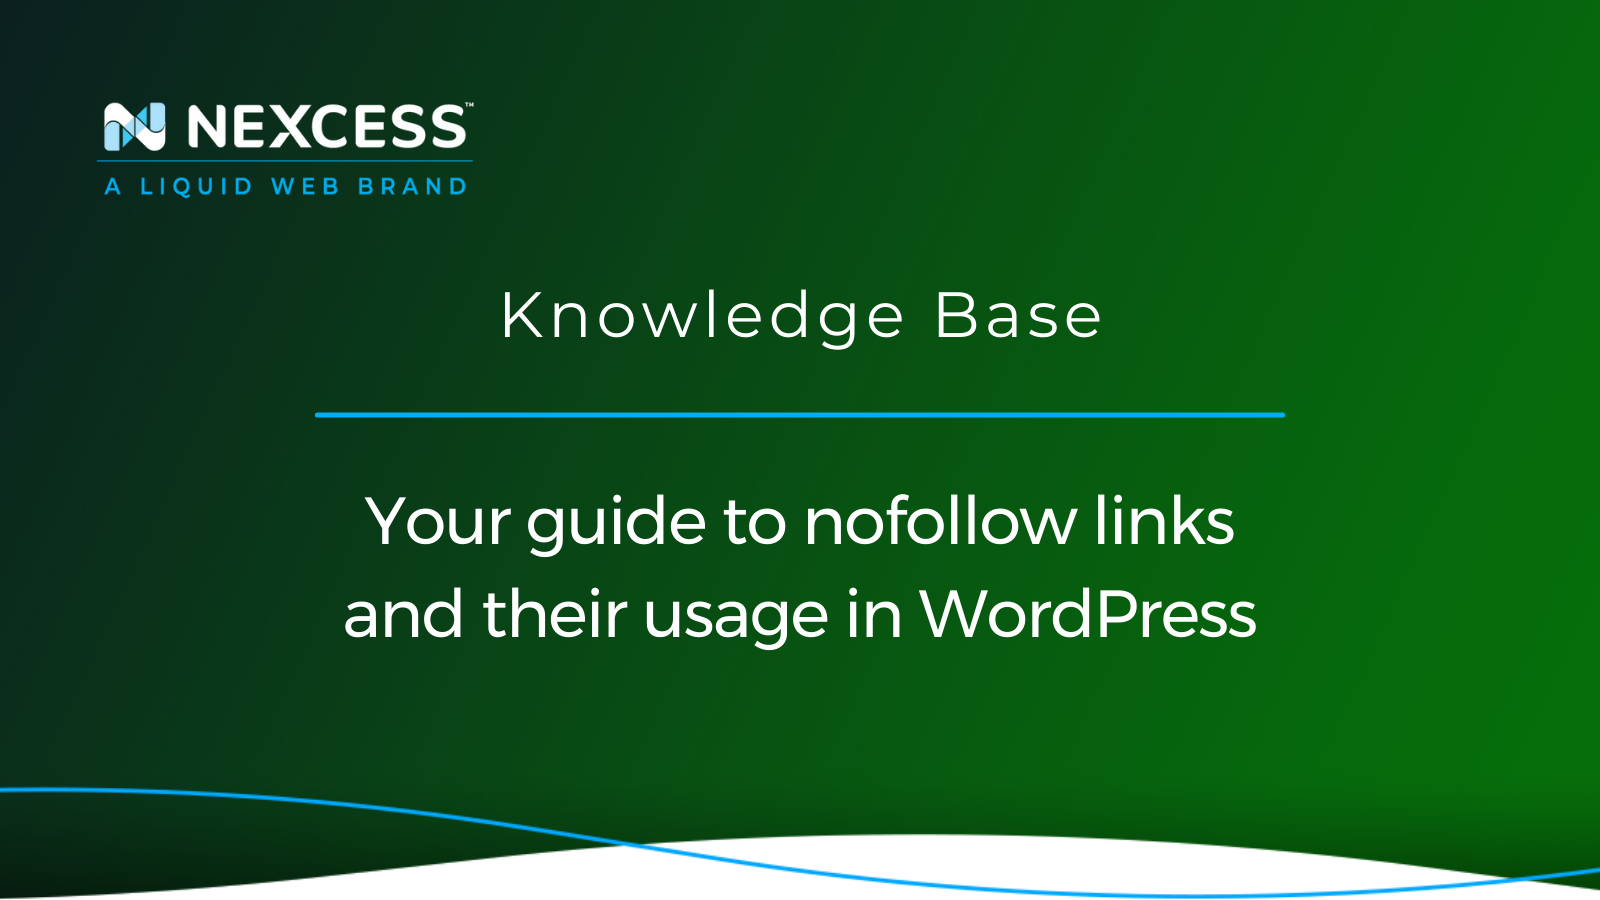 Your guide to nofollow links and their usage in WordPress